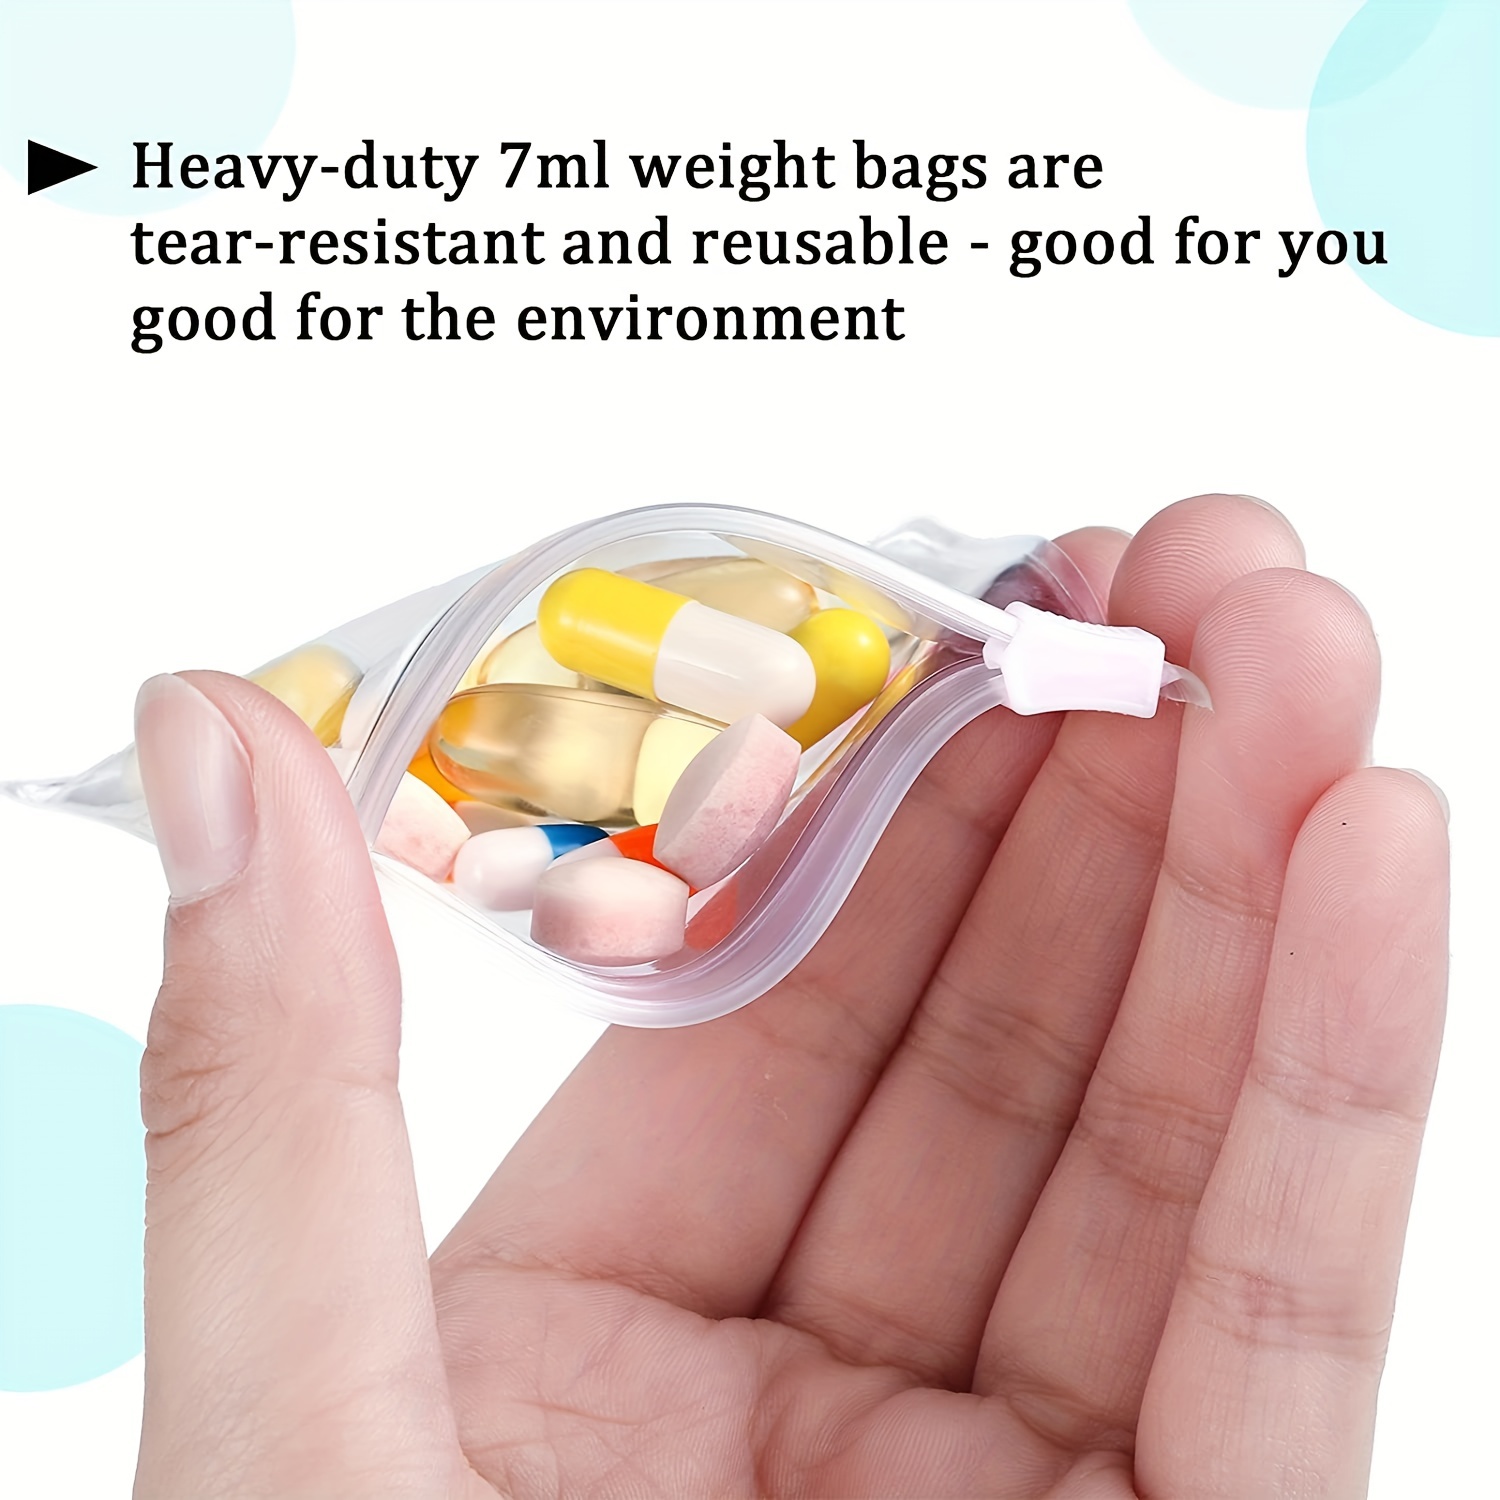  28 Pcs Pill Pouch Bags Reusable Zippered Pill Pouch Set  Medicine Organizer 7 Colors Self Sealing Translucent Medicine Bags Travel  Pill Bags with Slide Lock for Pills and Small Items 